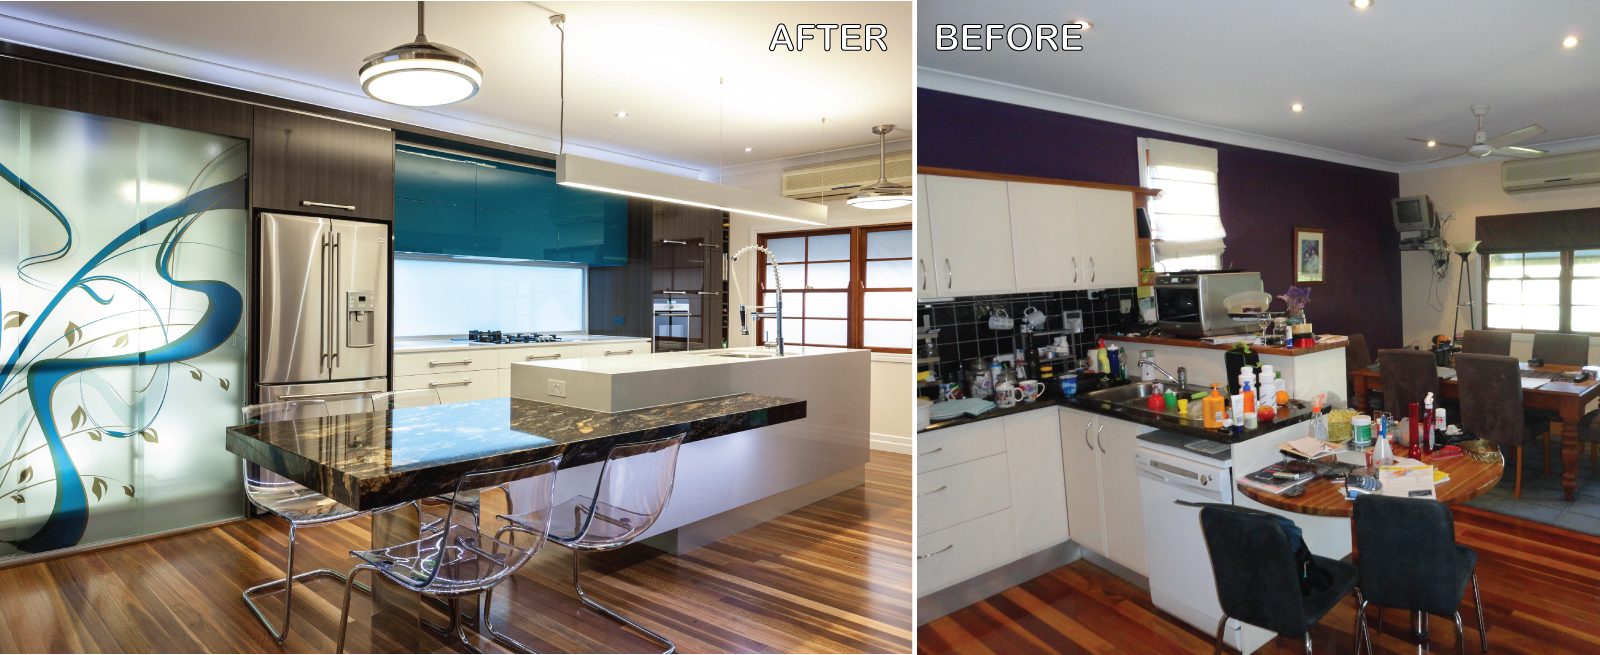 Kitchen-Transformations-Before-and-After